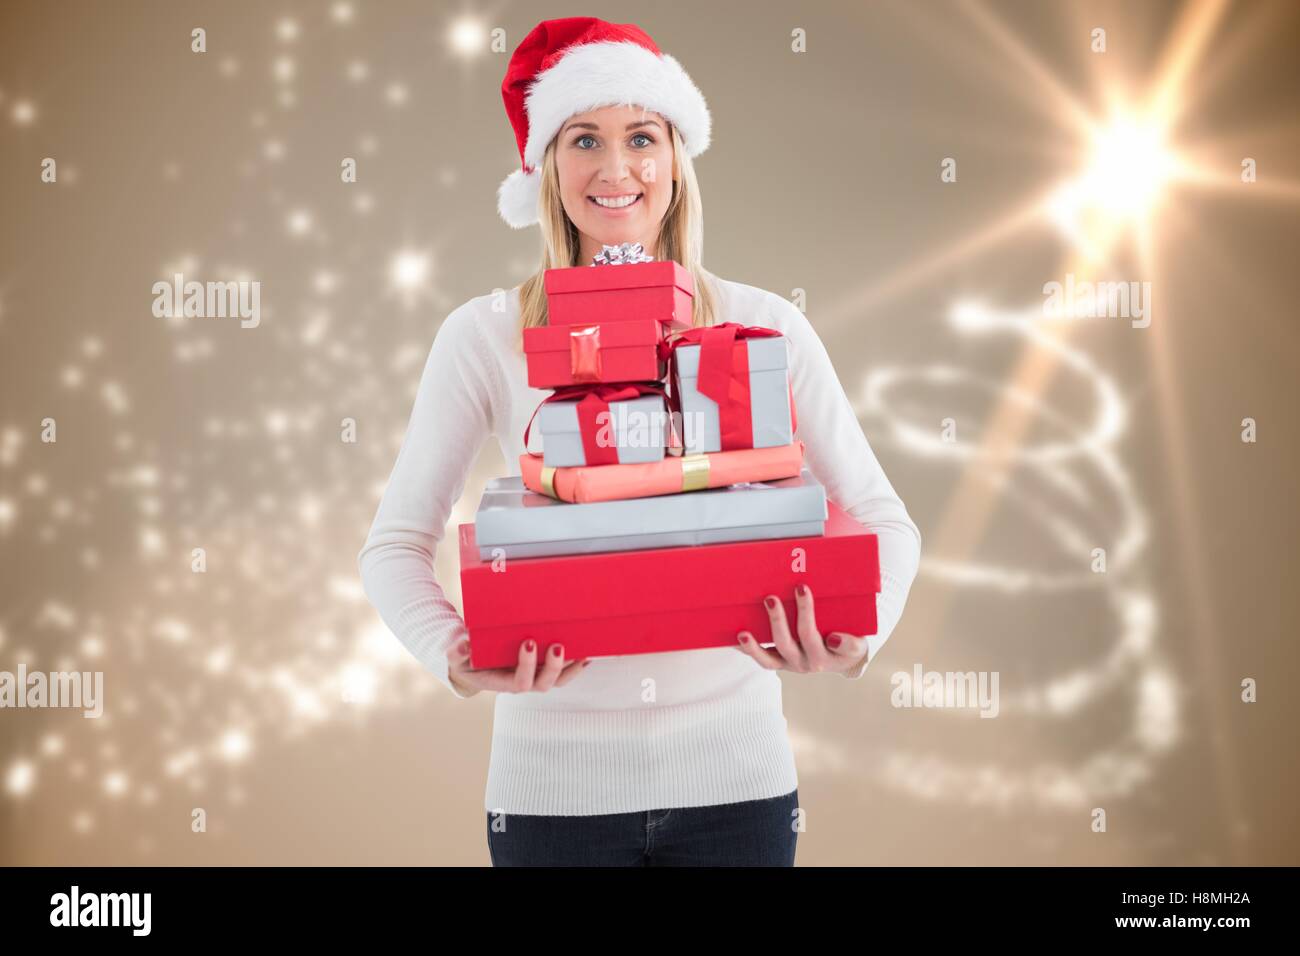 Smiling woman in santa hat holding stack of christmas gifts Stock Photo